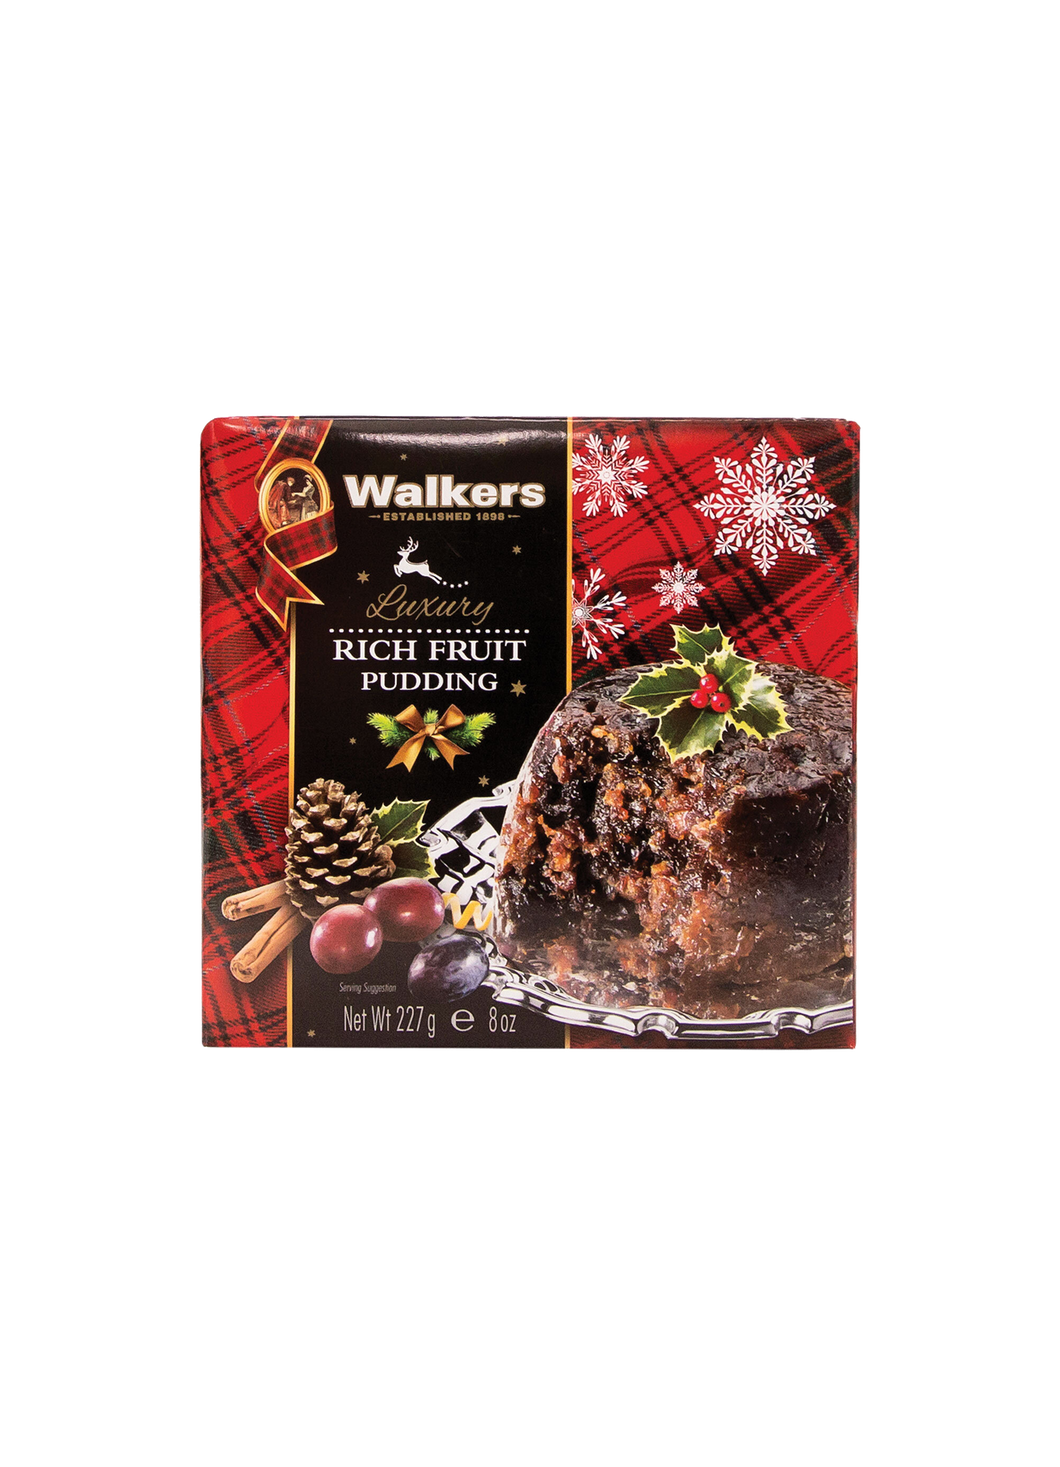 Walkers Luxury Rich Fruit Pudding 227g